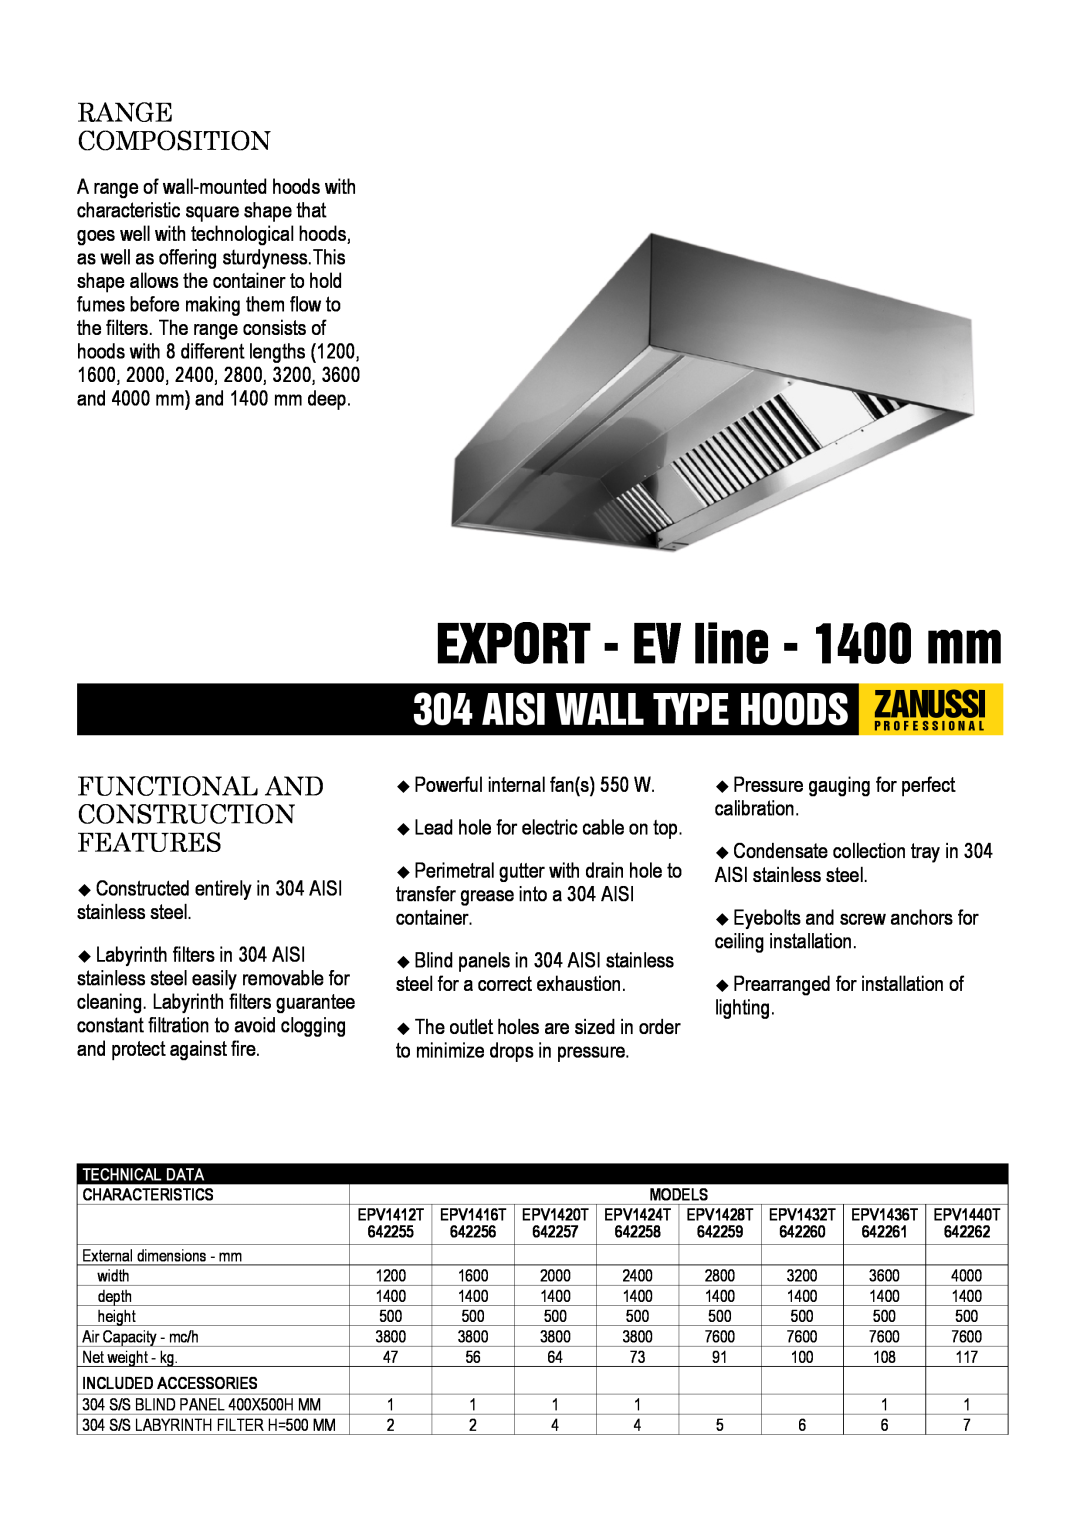 Zanussi 642259, 642262 dimensions EXPORT - EV line - 1400 mm, Range Composition, Functional And Construction Features 